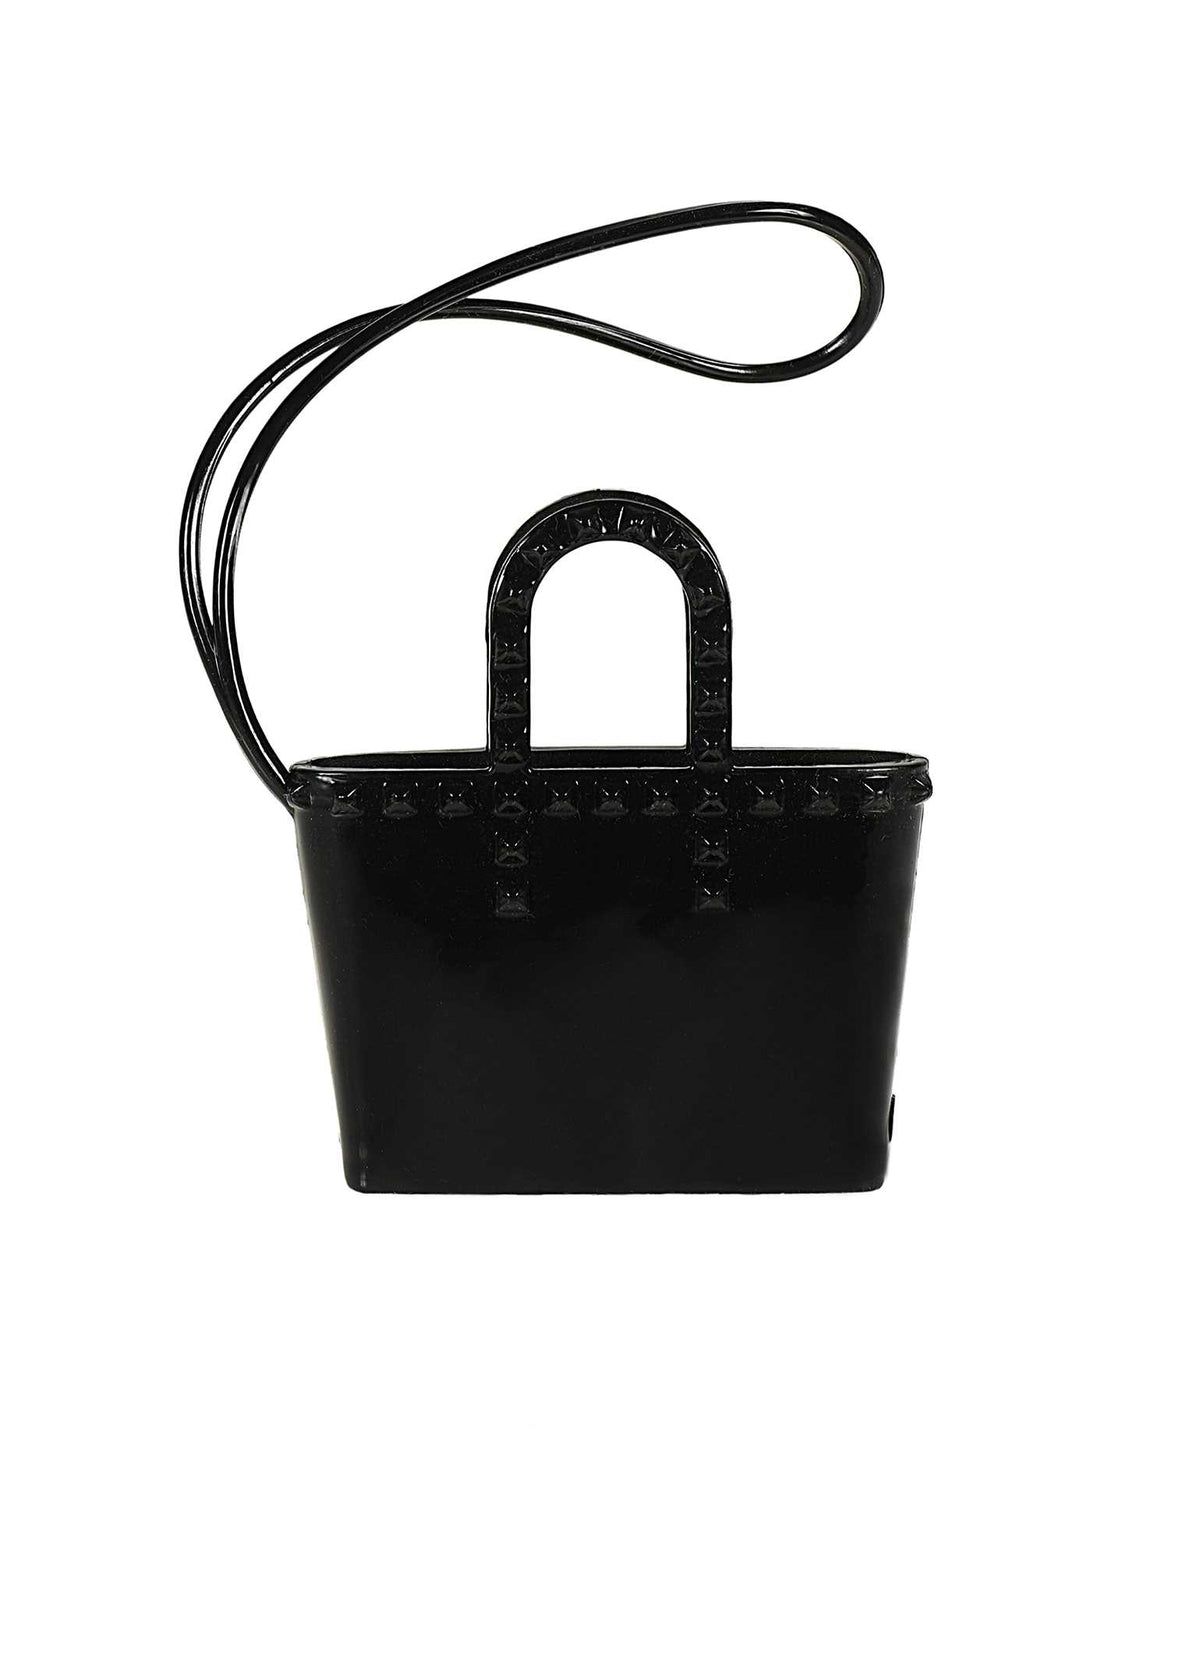 Sustainable Carmen Sol Itsy Bitsy purse charms which tiny tote shaped in color black